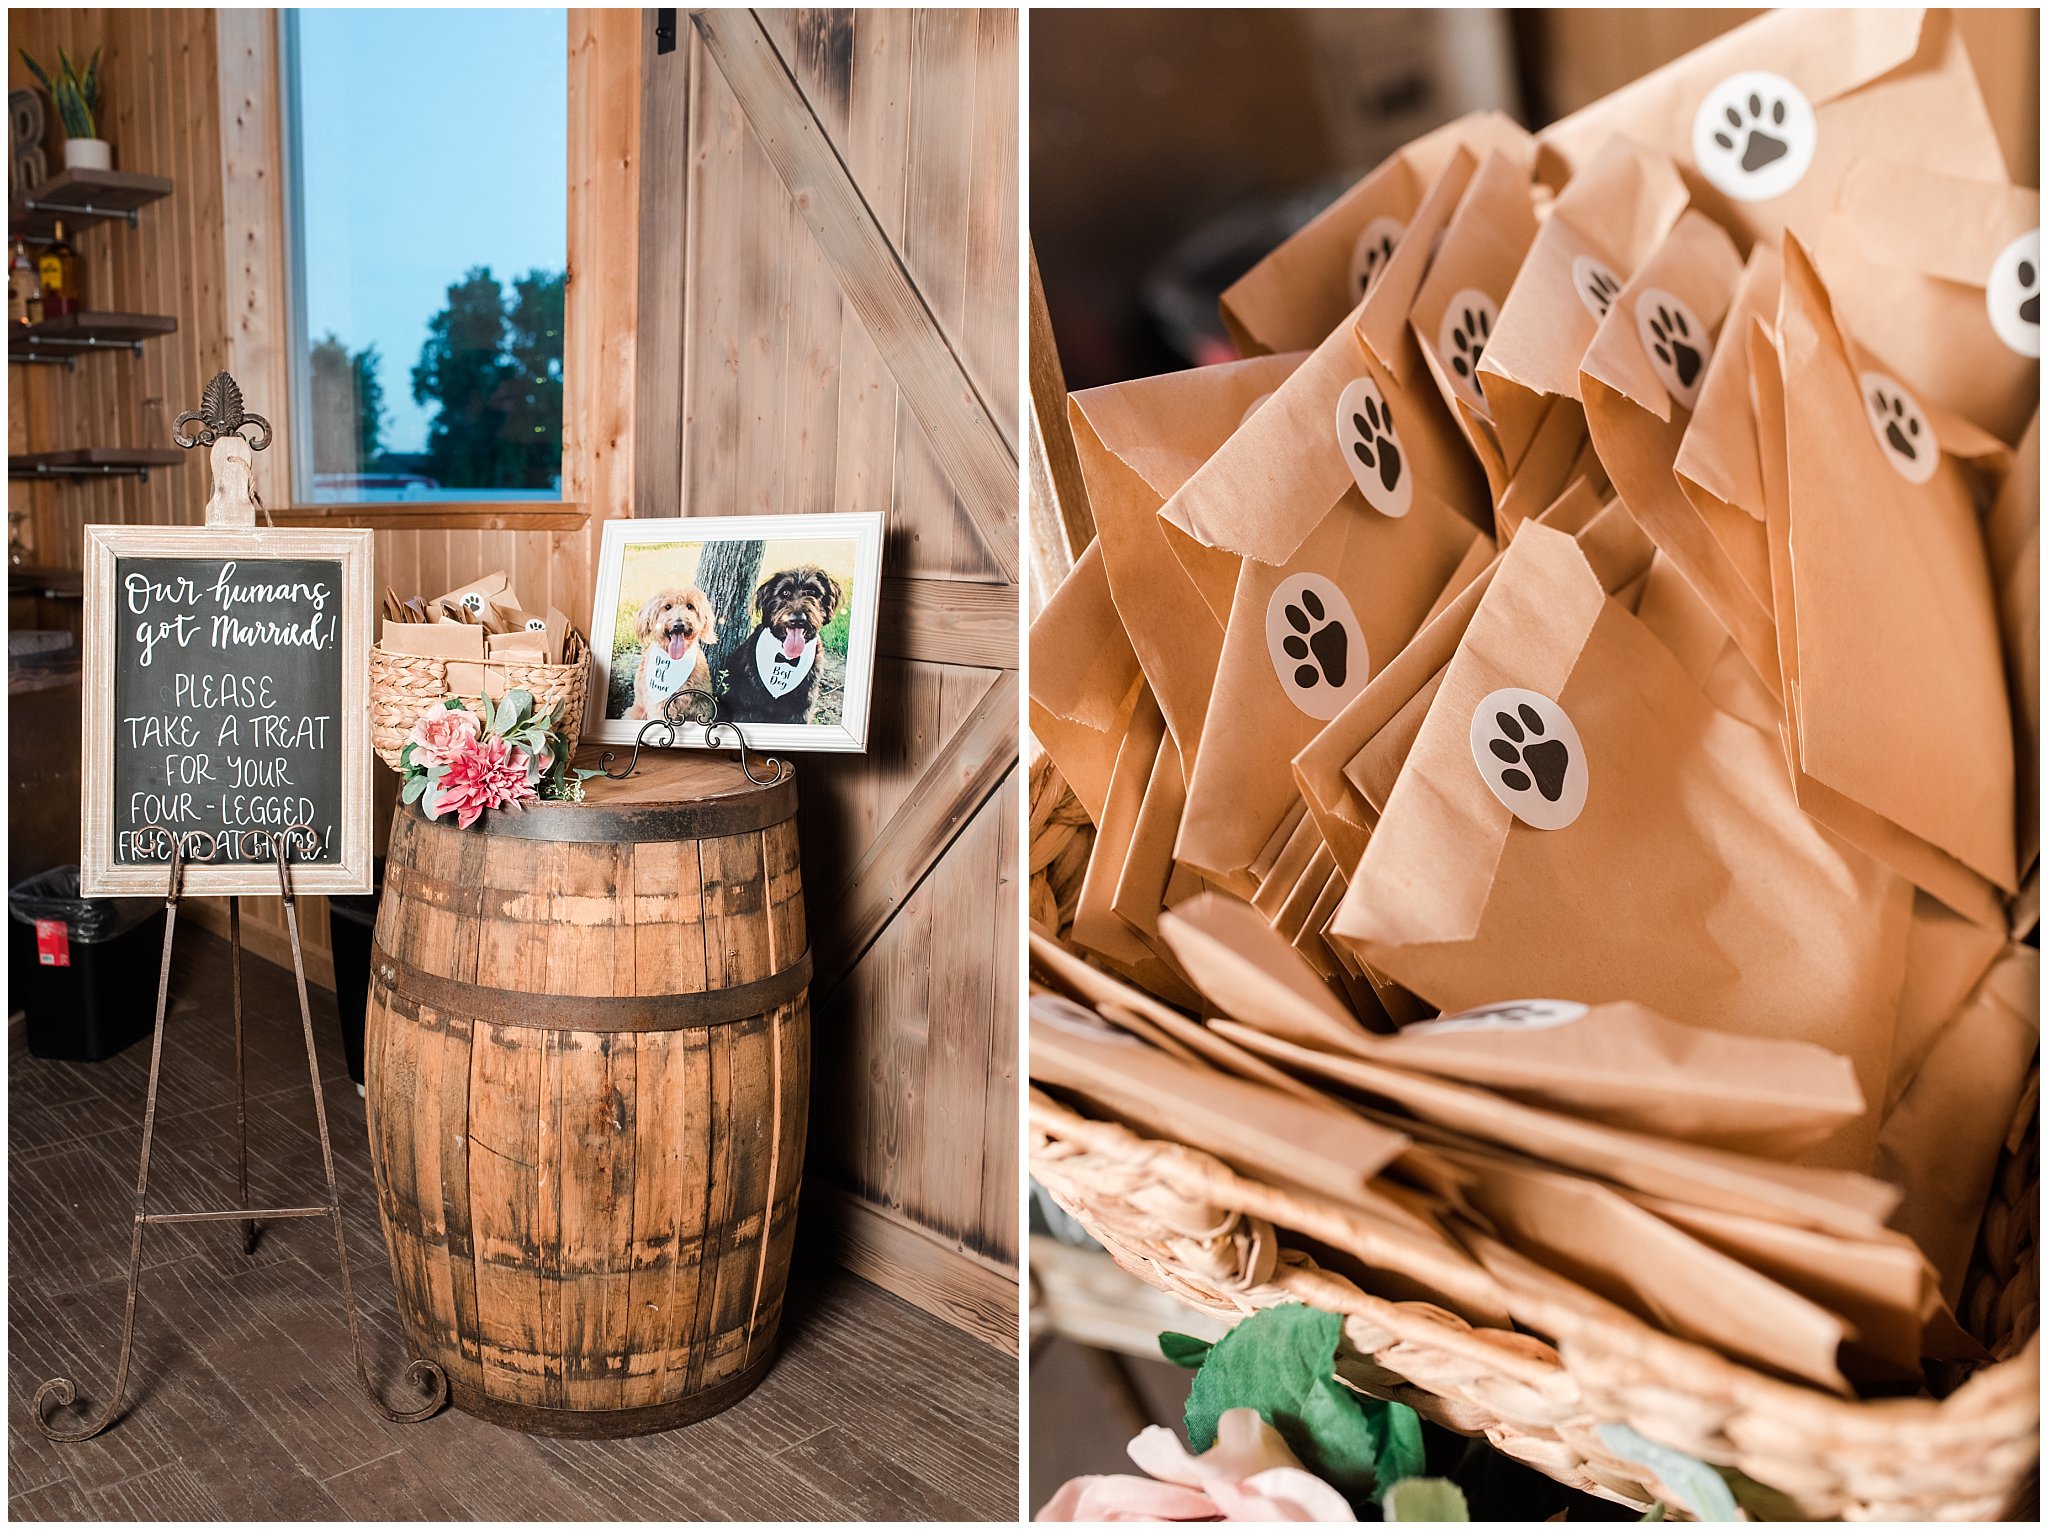 Reception decor with dog tribute and doggy bags for take home treat in barn | Oak Hills Utah Dusty Rose and Gray Summer Wedding | Jessie and Dallin Photography